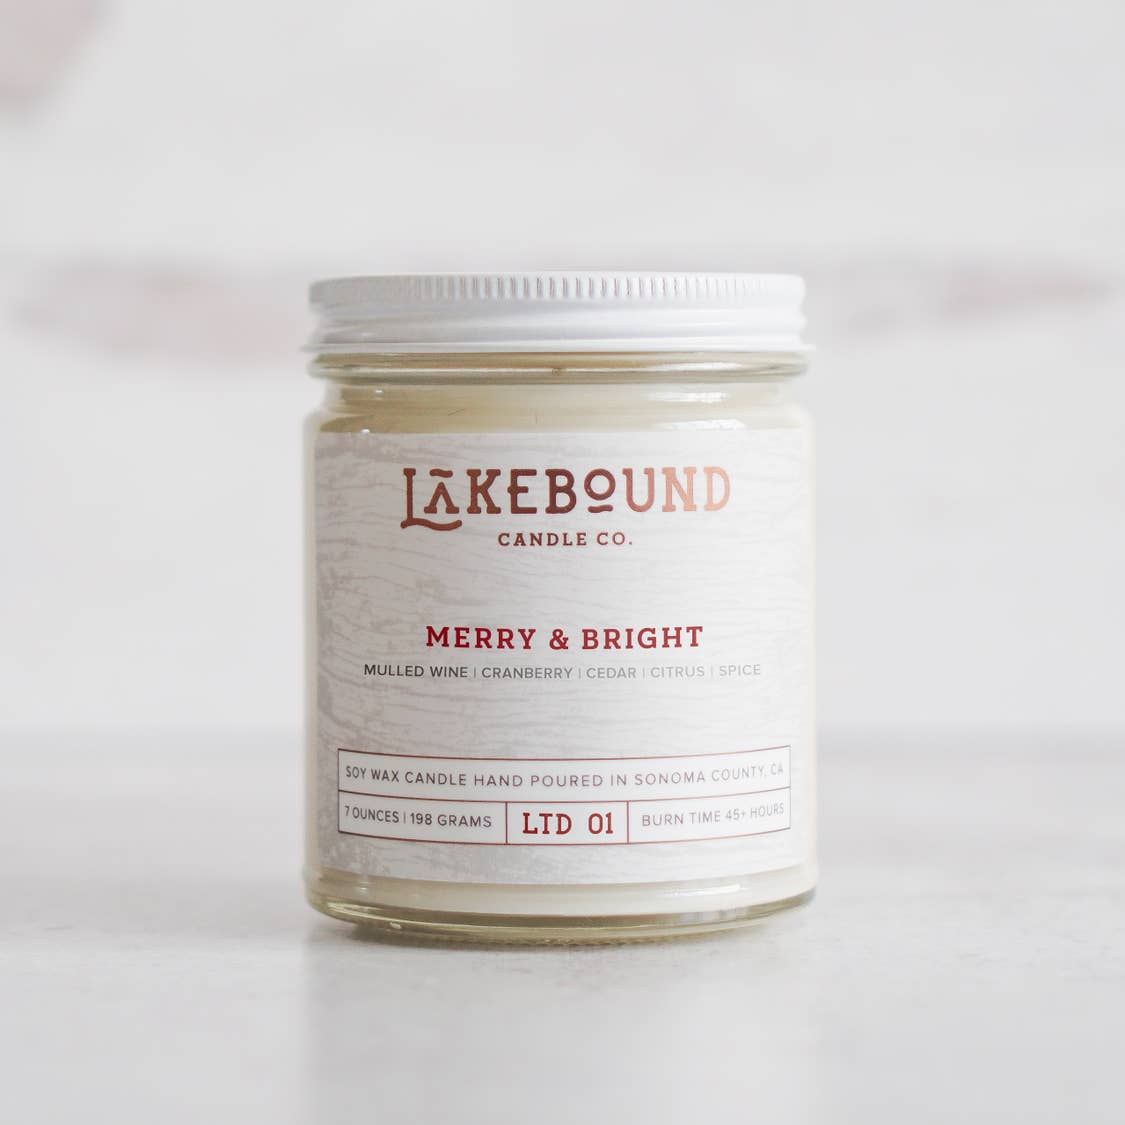 Merry & Bright Soy Candle Lakebound Candle Co